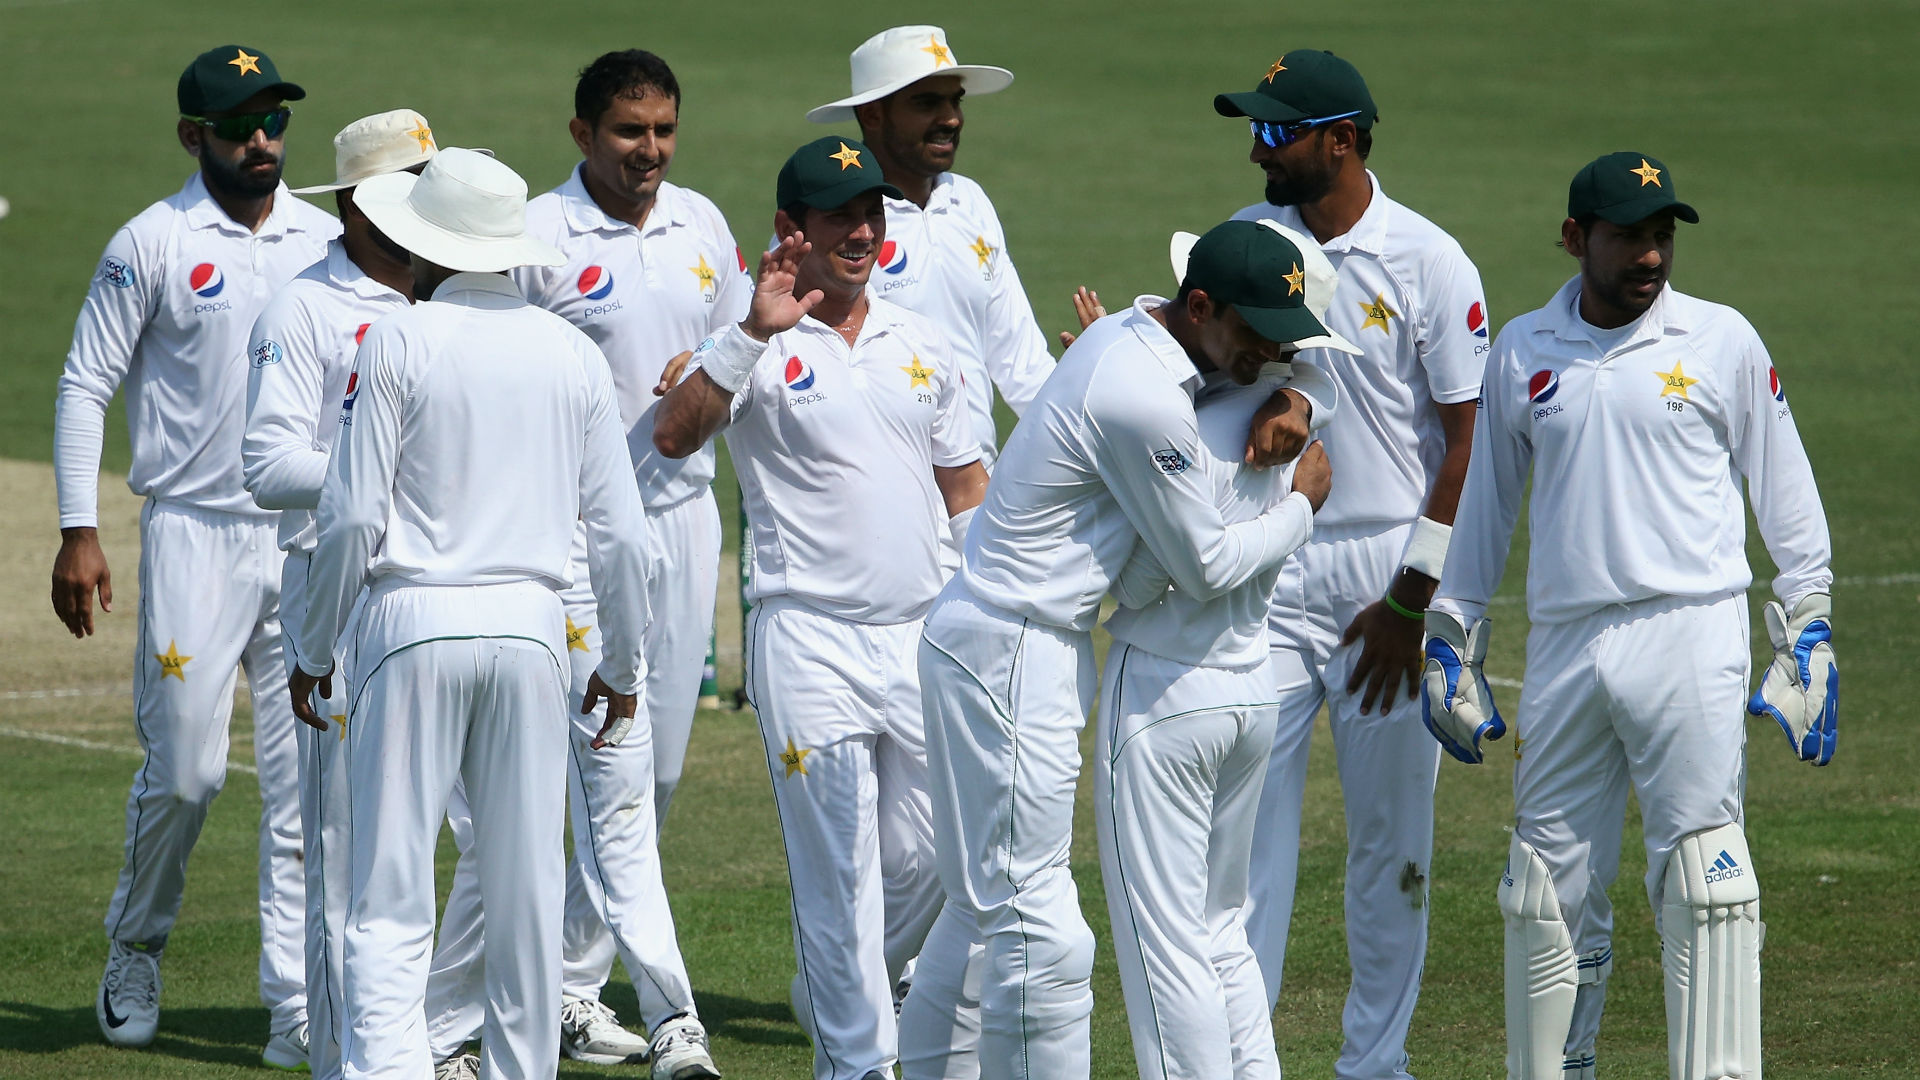 Australia have an uphill battle on their hands to get a result from the second Test against Pakistan after Mohammad Abbas cut through them.